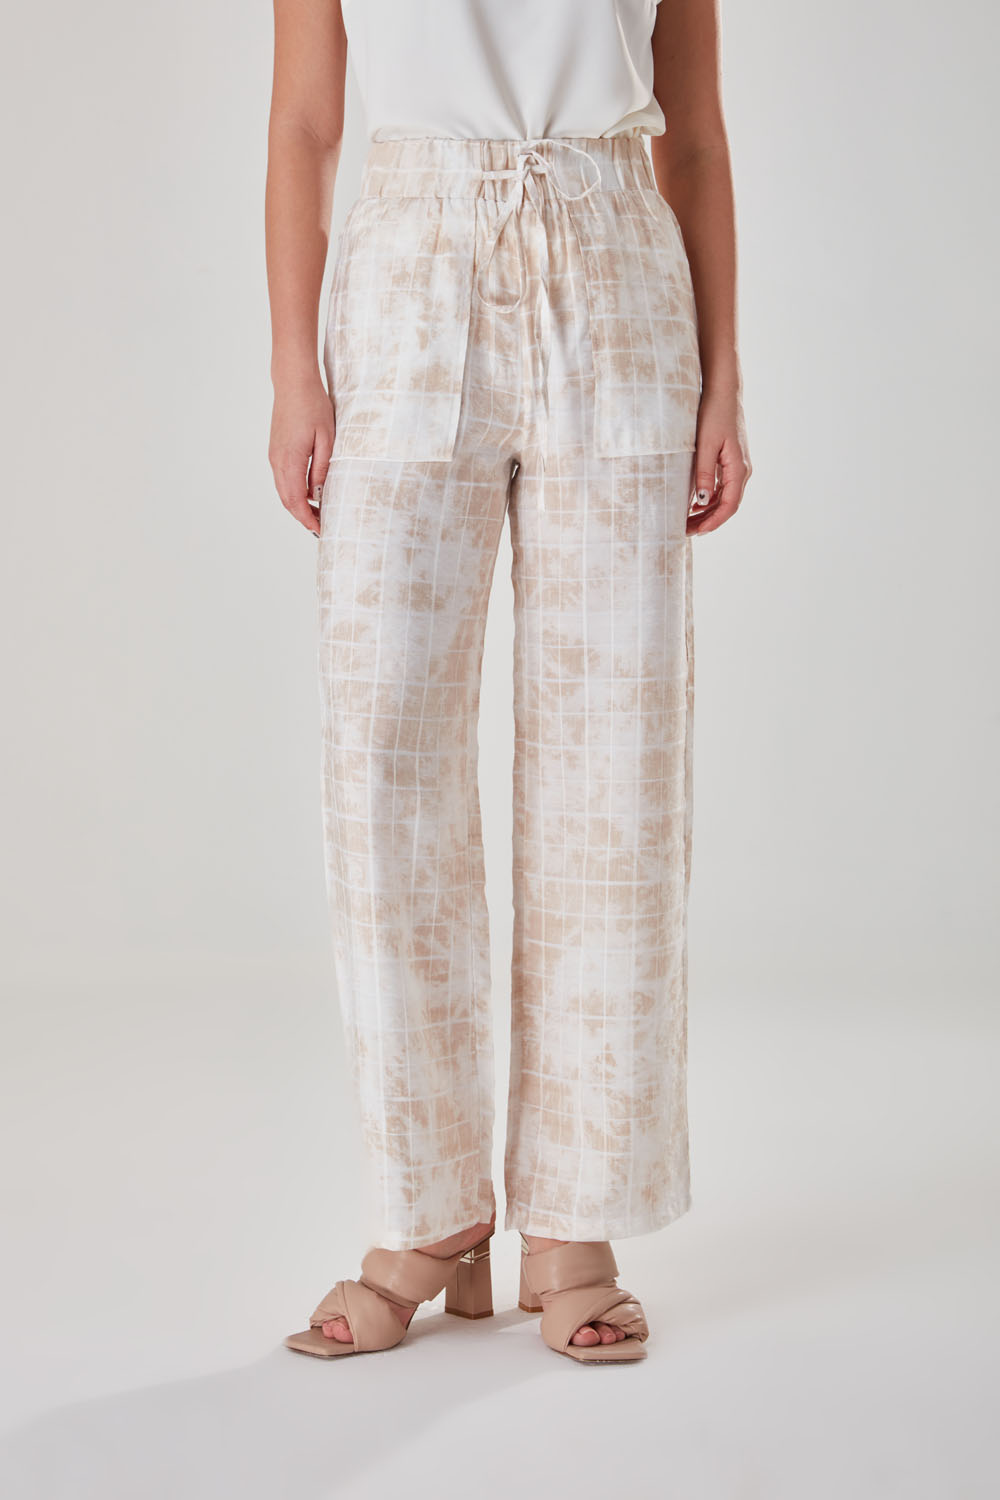 Beige Batik Patterned Checkered Trousers